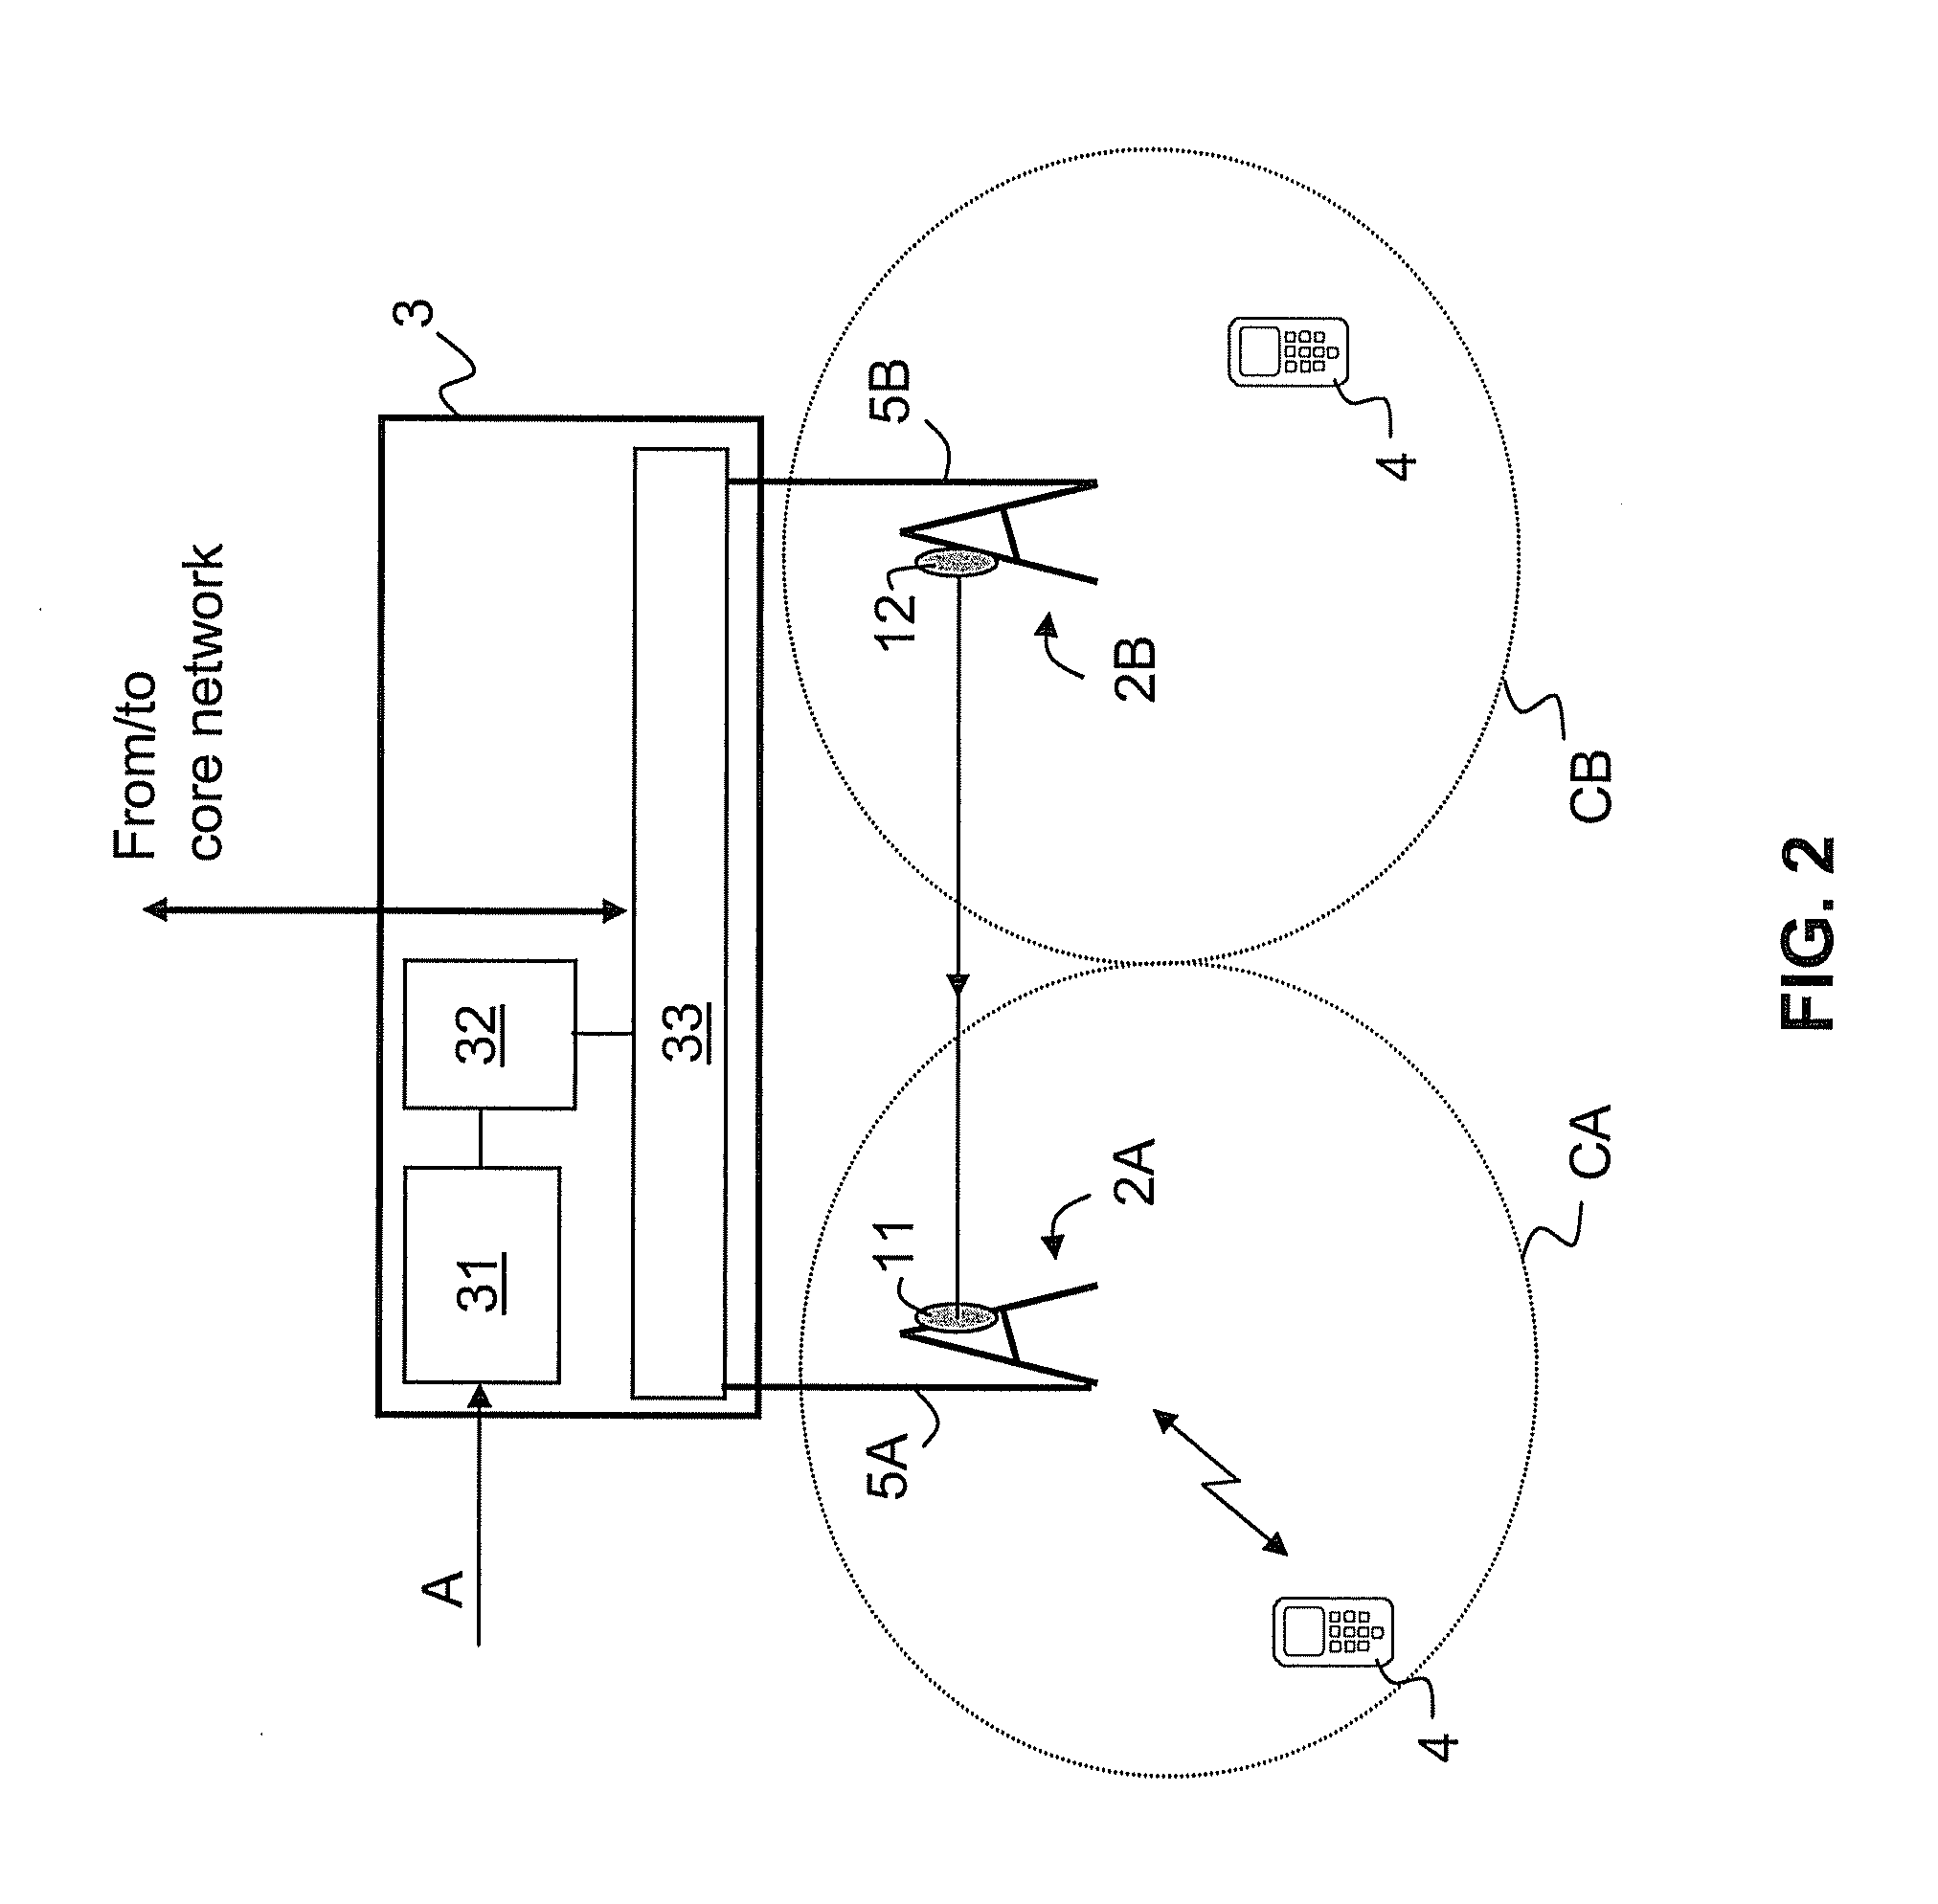 Communication System and Method For Wirelessly Exchanging User Data With a User Terminal